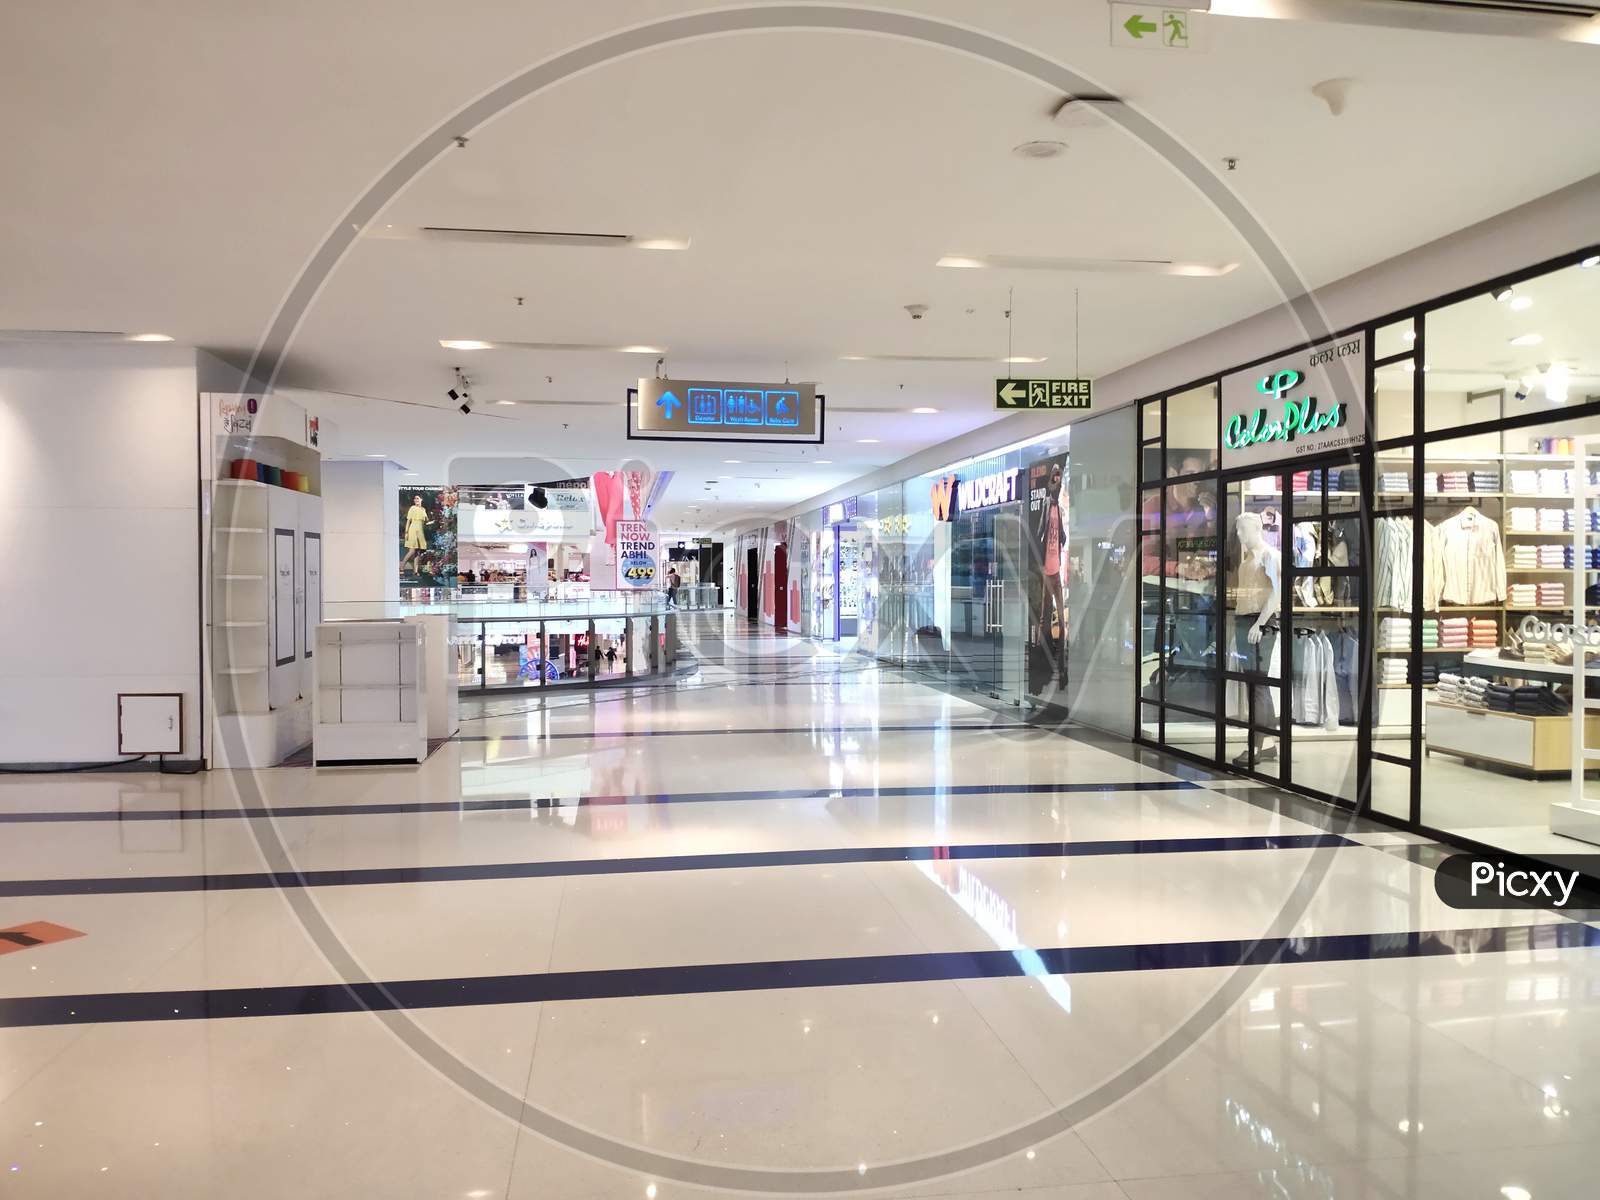 Empty shopping mall and retail shops in India